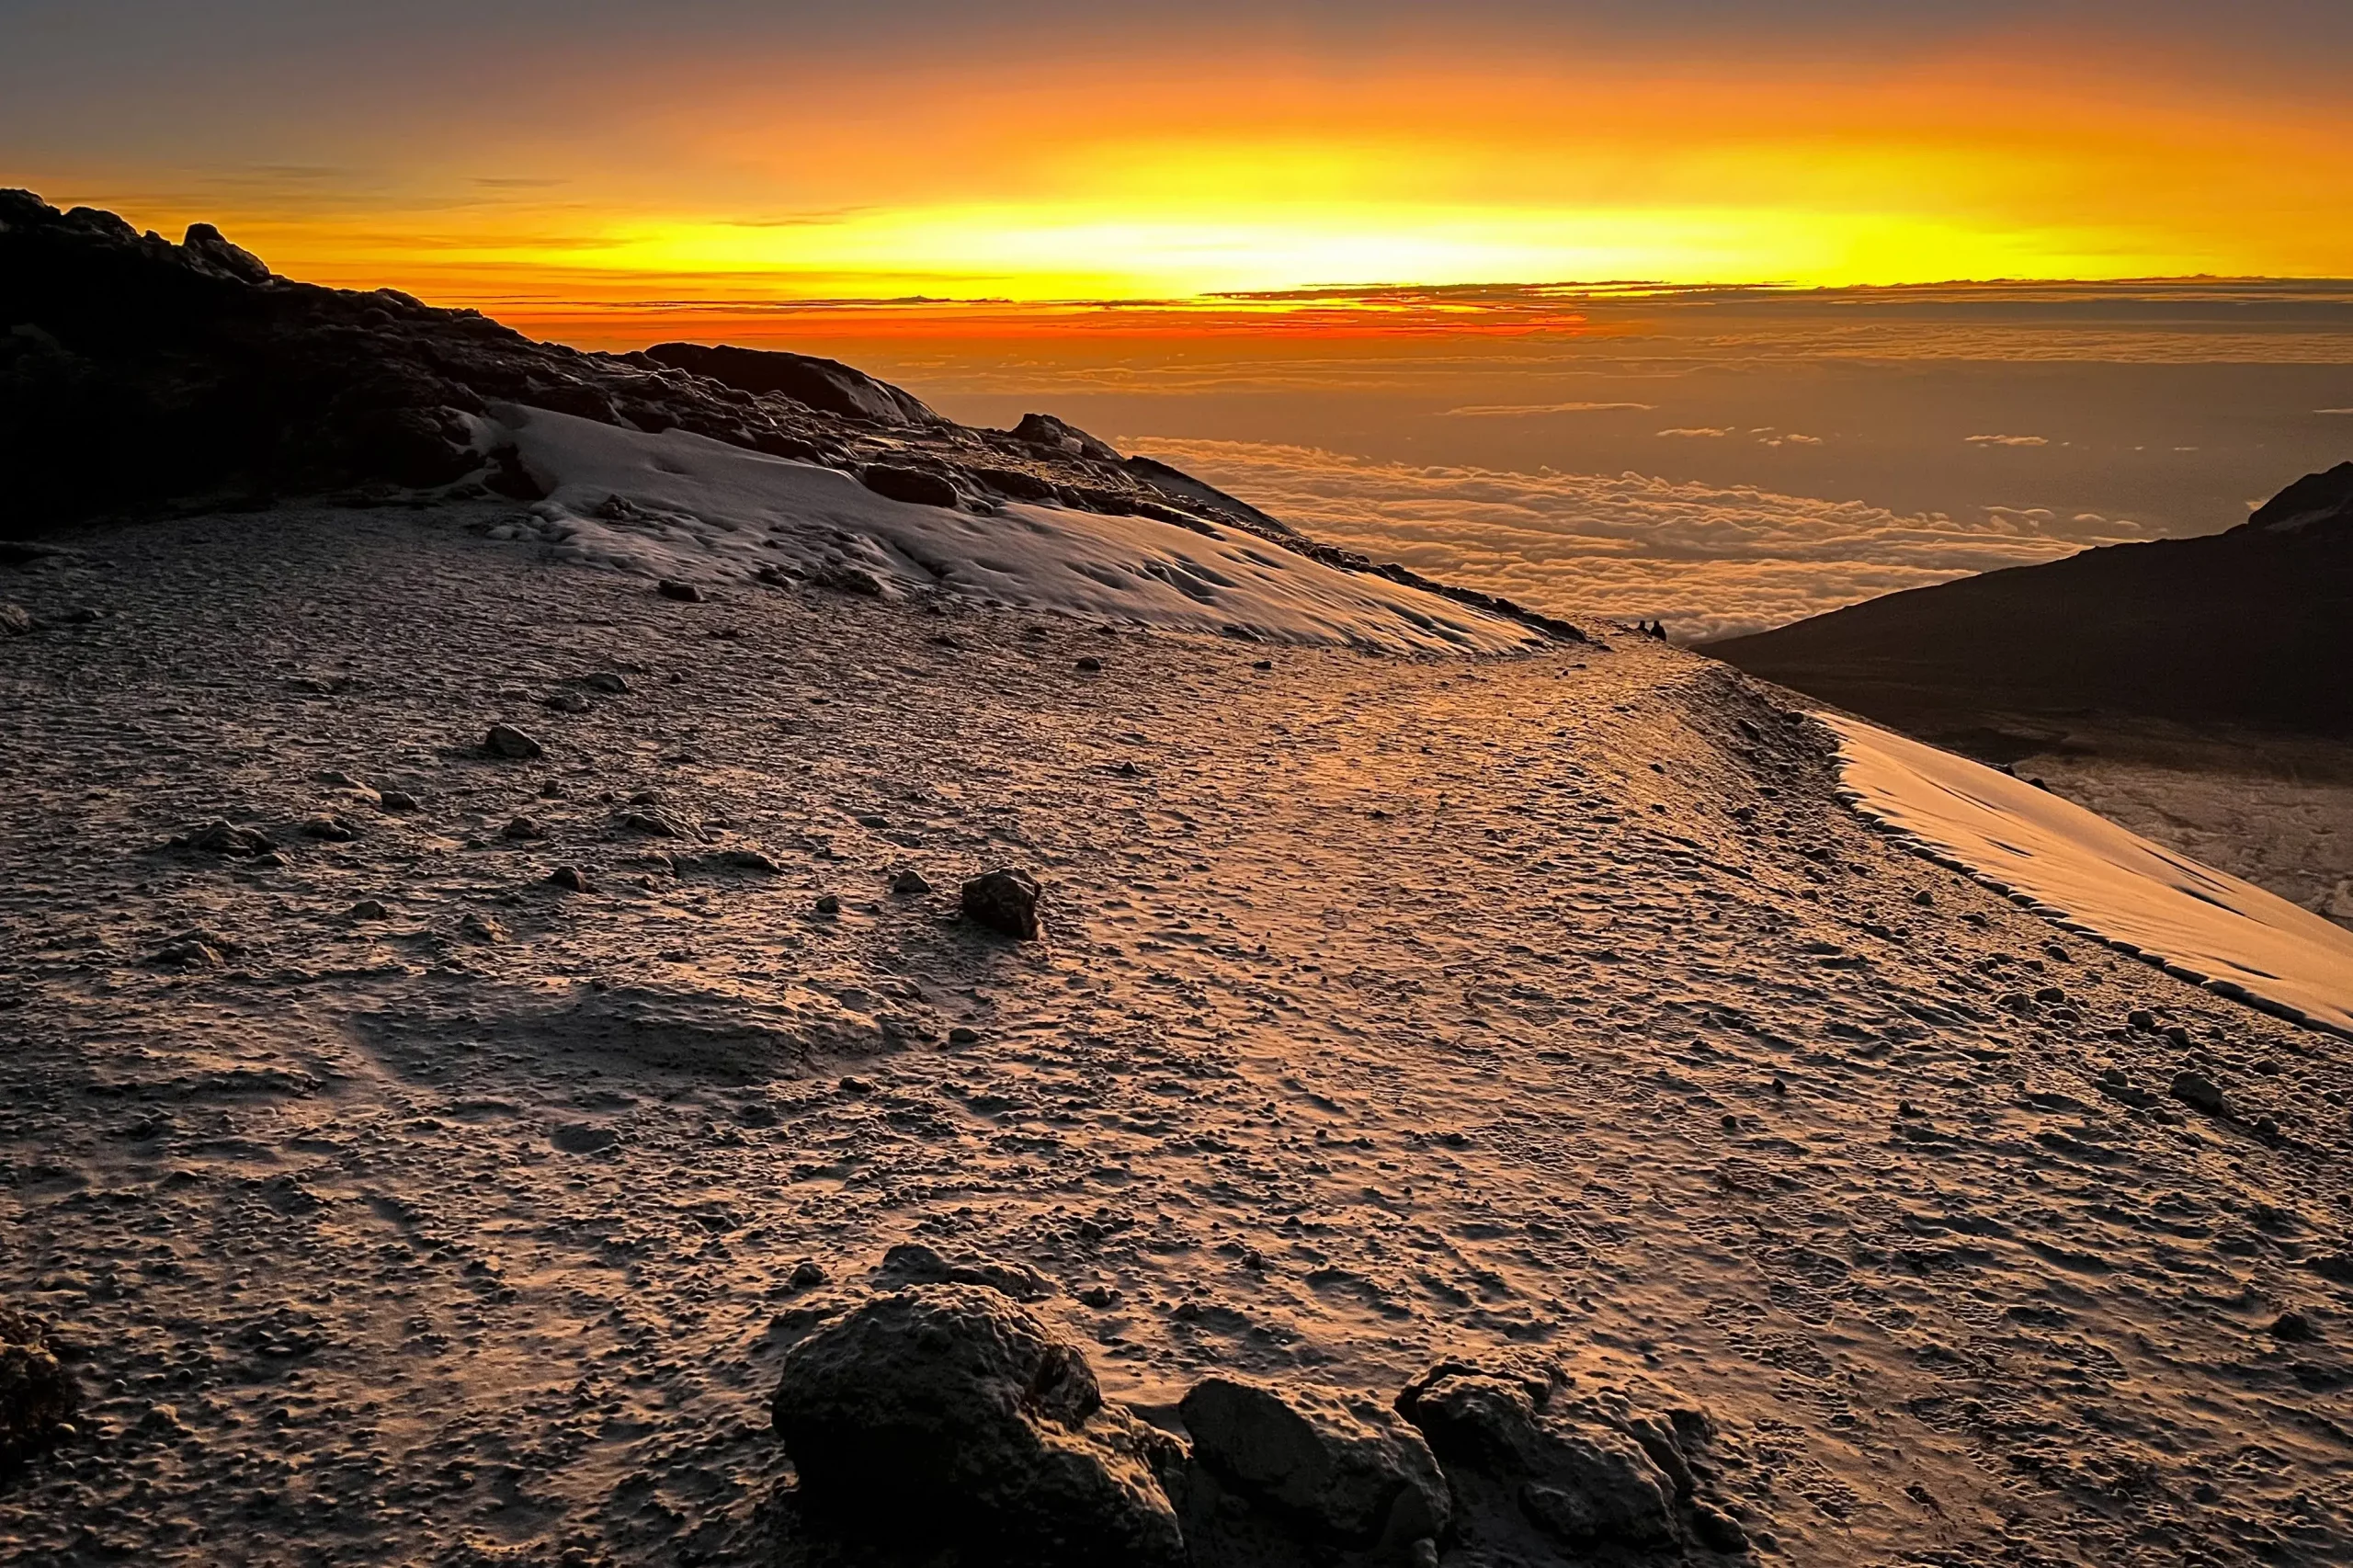 the magnificent view of sunset at Kilimanjaro peak after trekking for 5 days